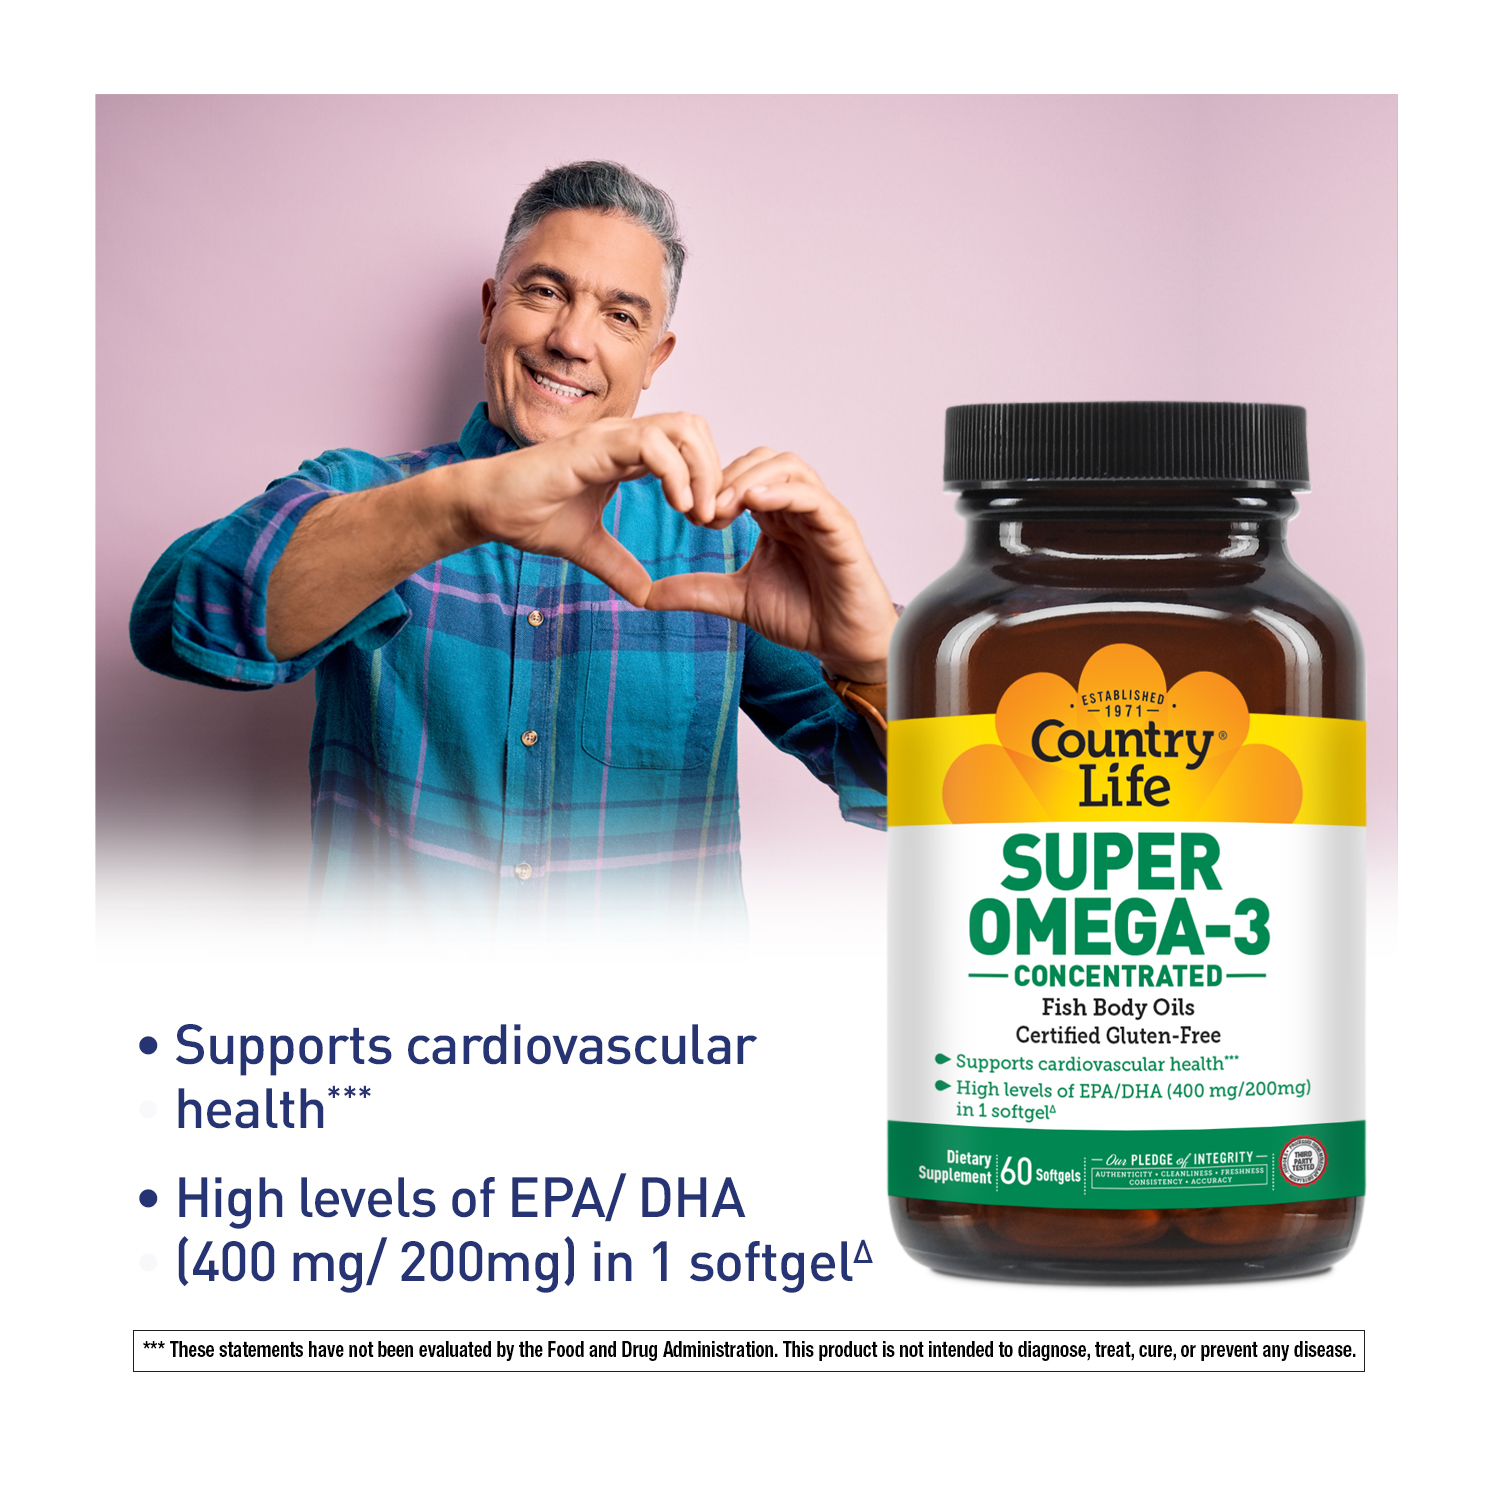 Super Omega-3 Concentrated